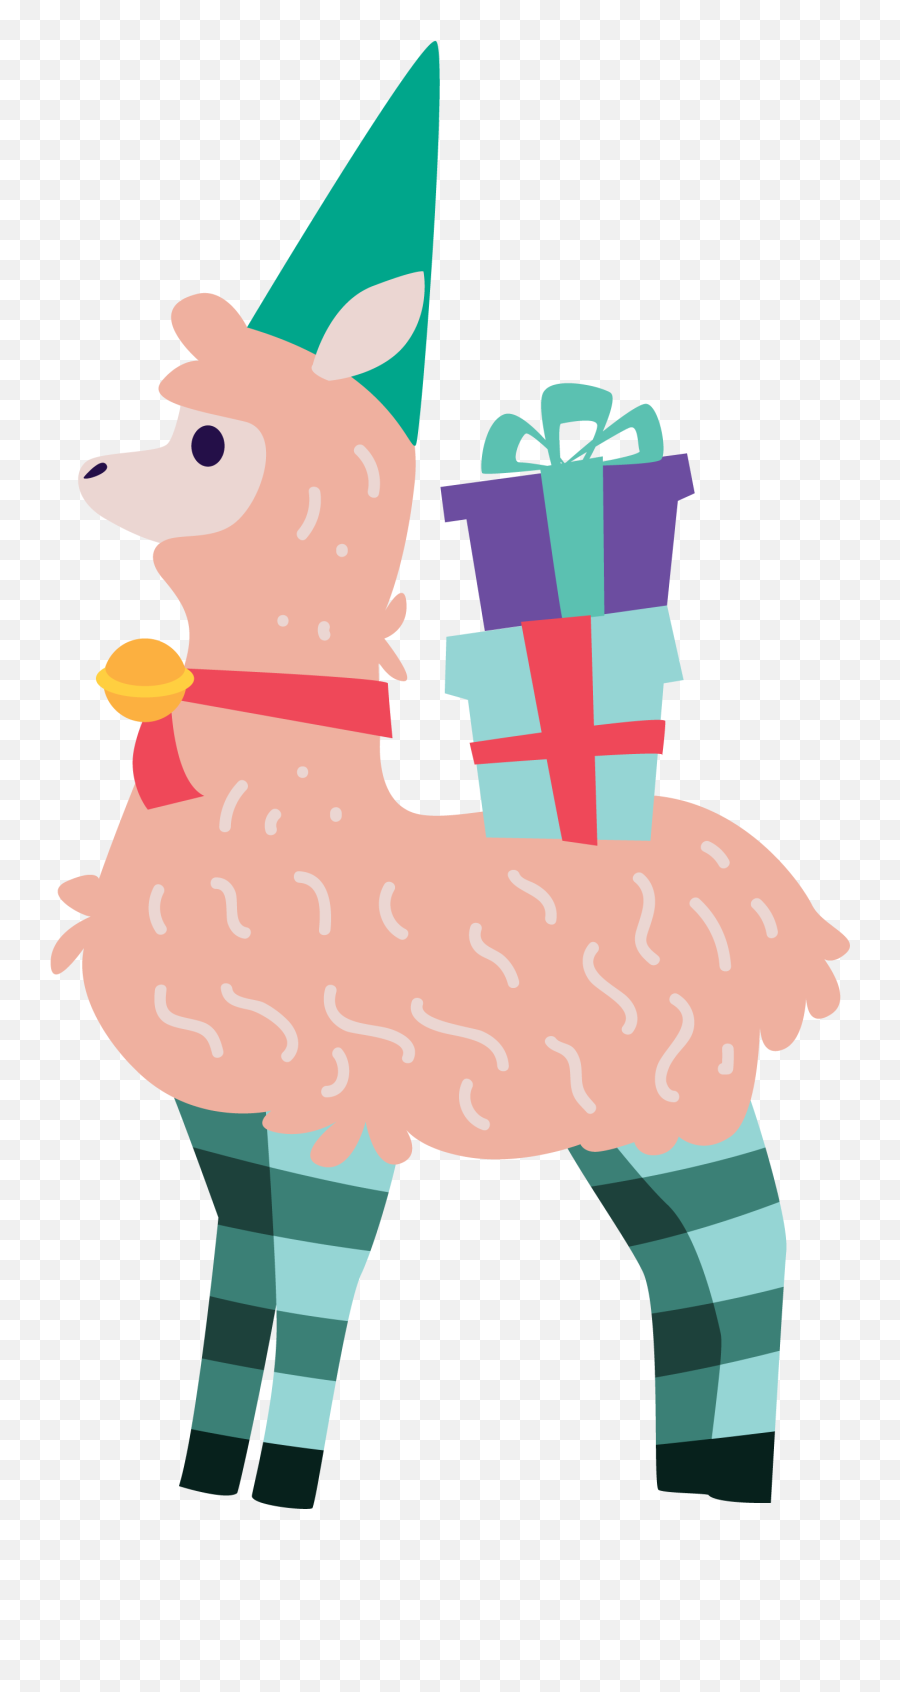 Elf Llama - Fictional Character Emoji,Girl With The Pizza Emoji For Dominos